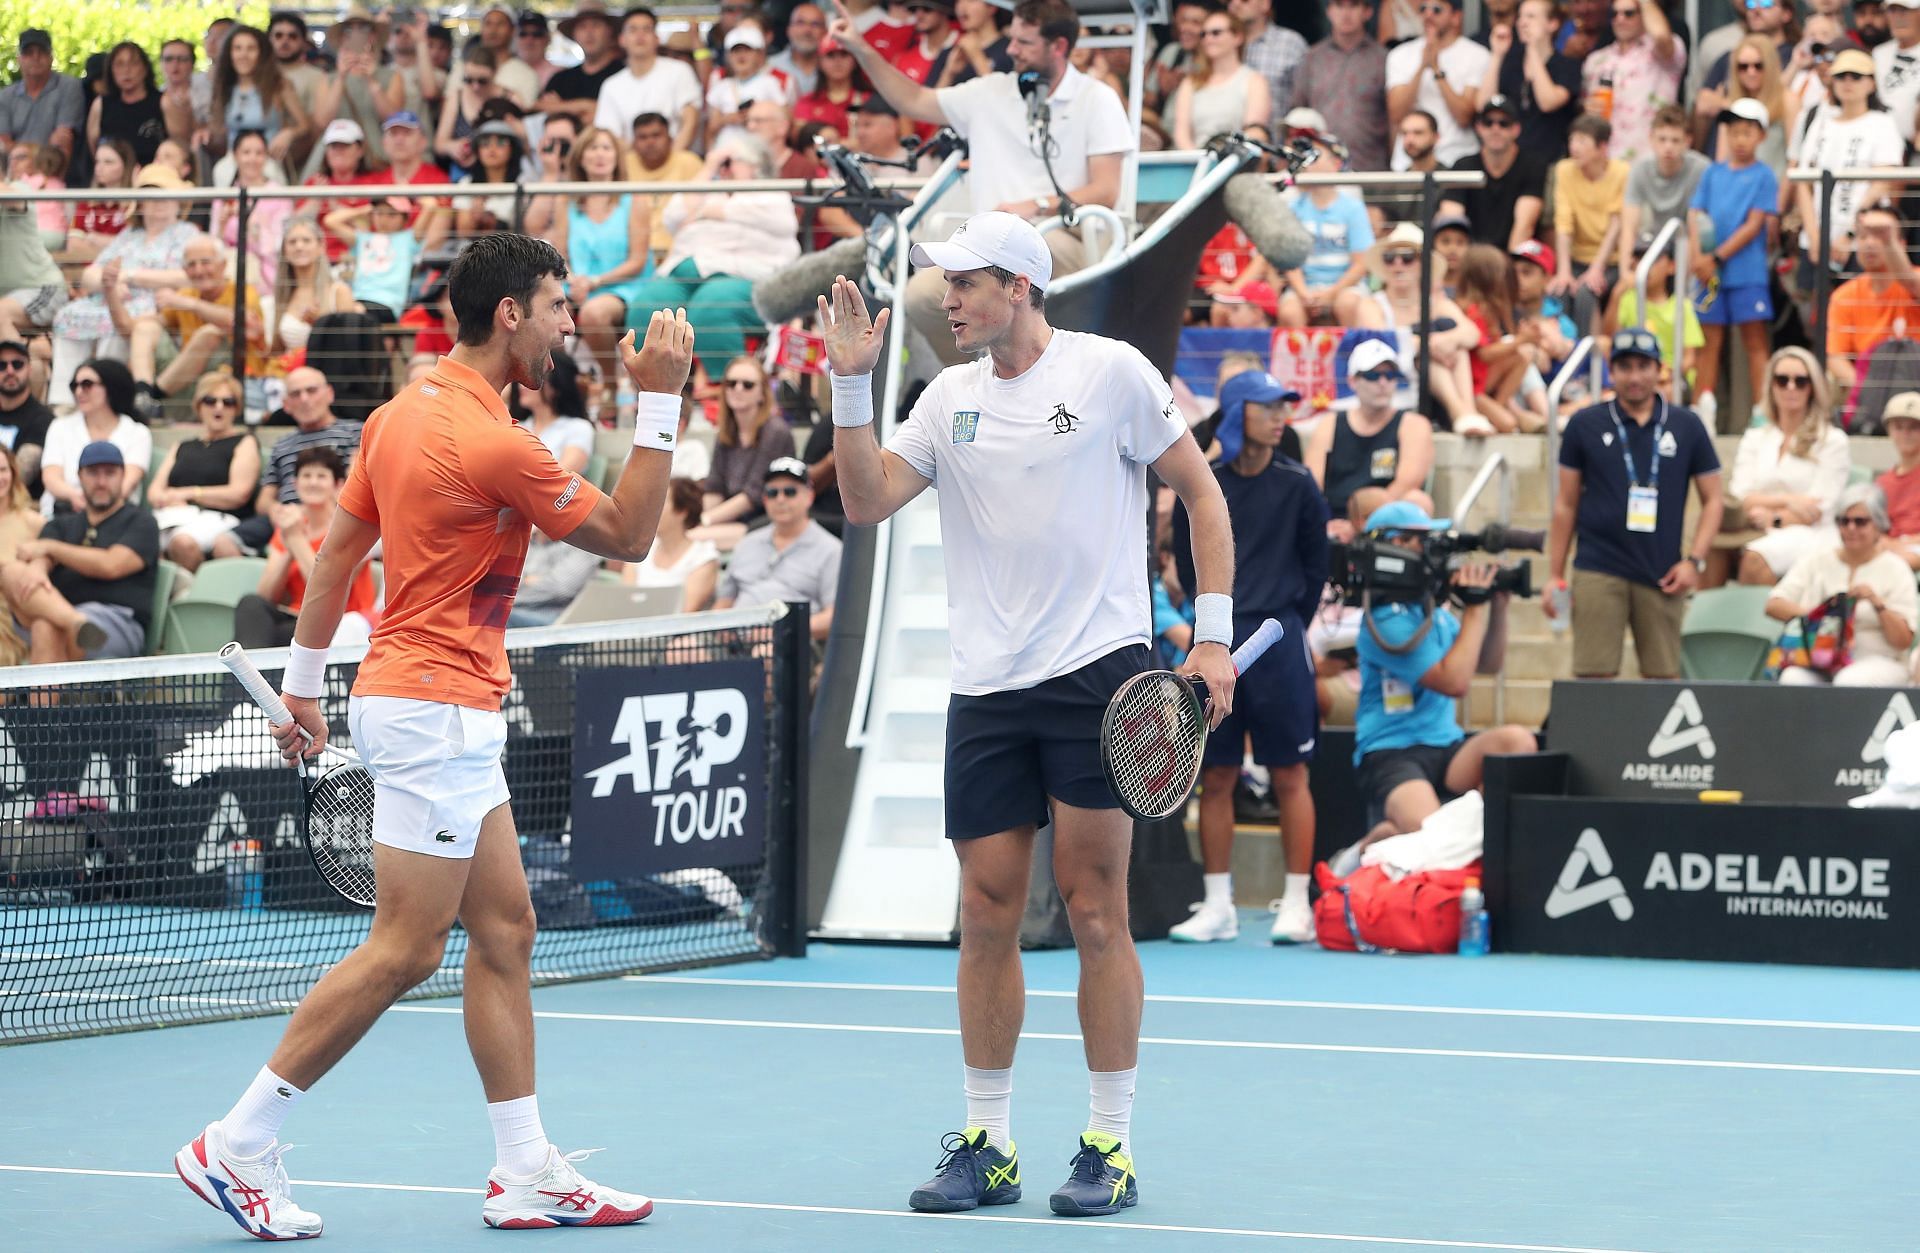 PTPA founders Novak Djokovic and Vasek Pospisil during a doubles match at the 2023 Adelaide International 1.